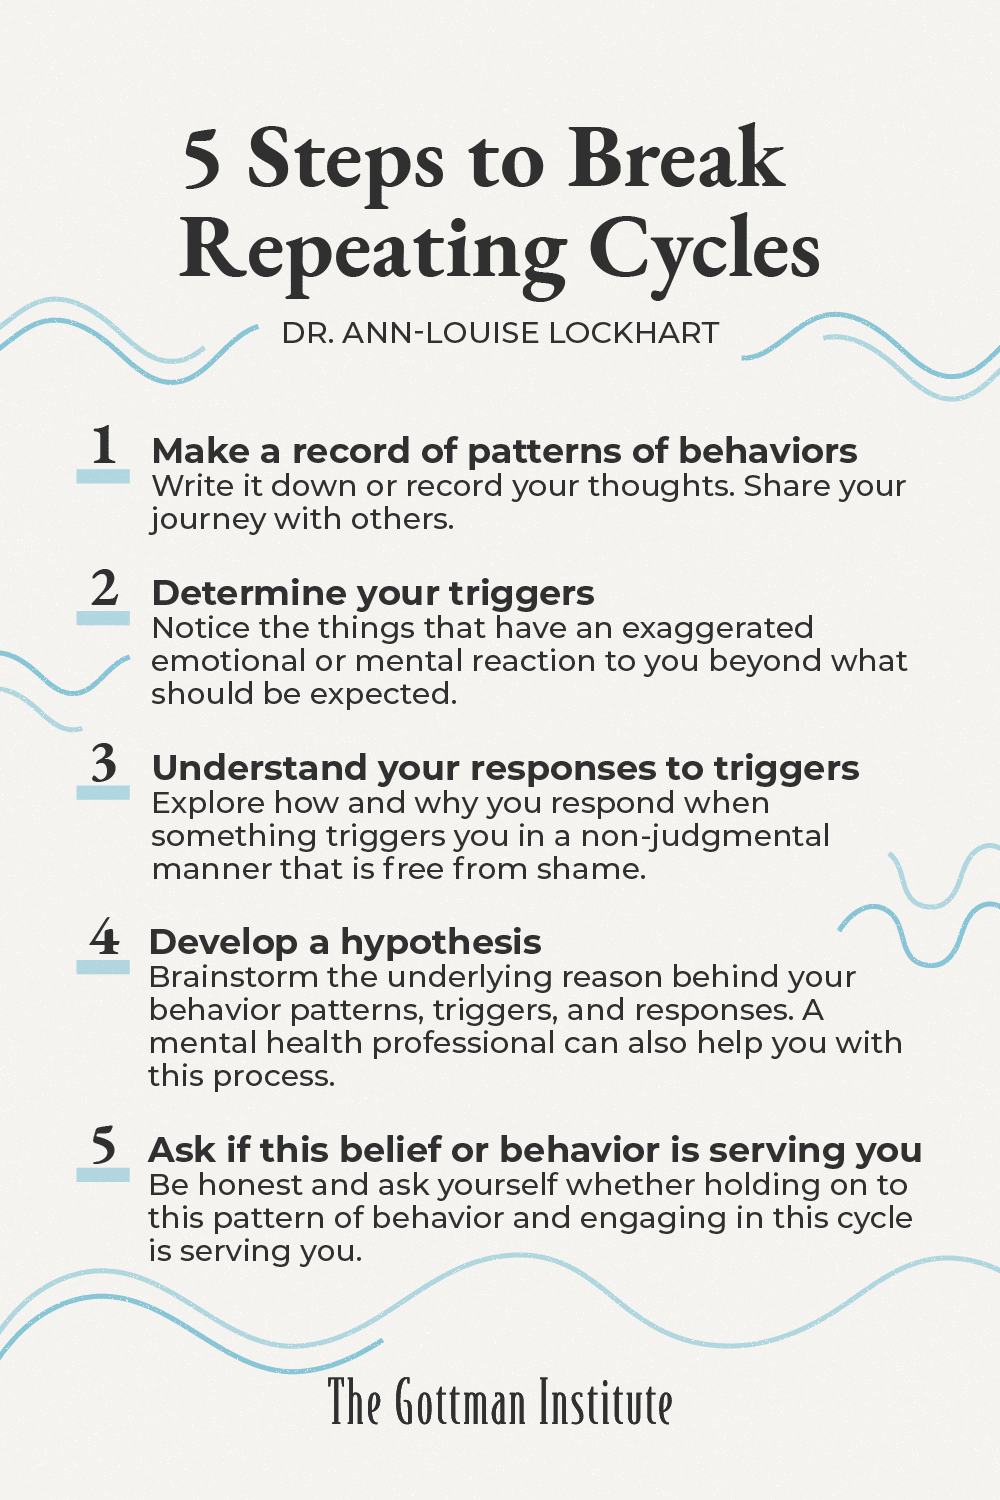 5 Steps to Break Repeating Cycles